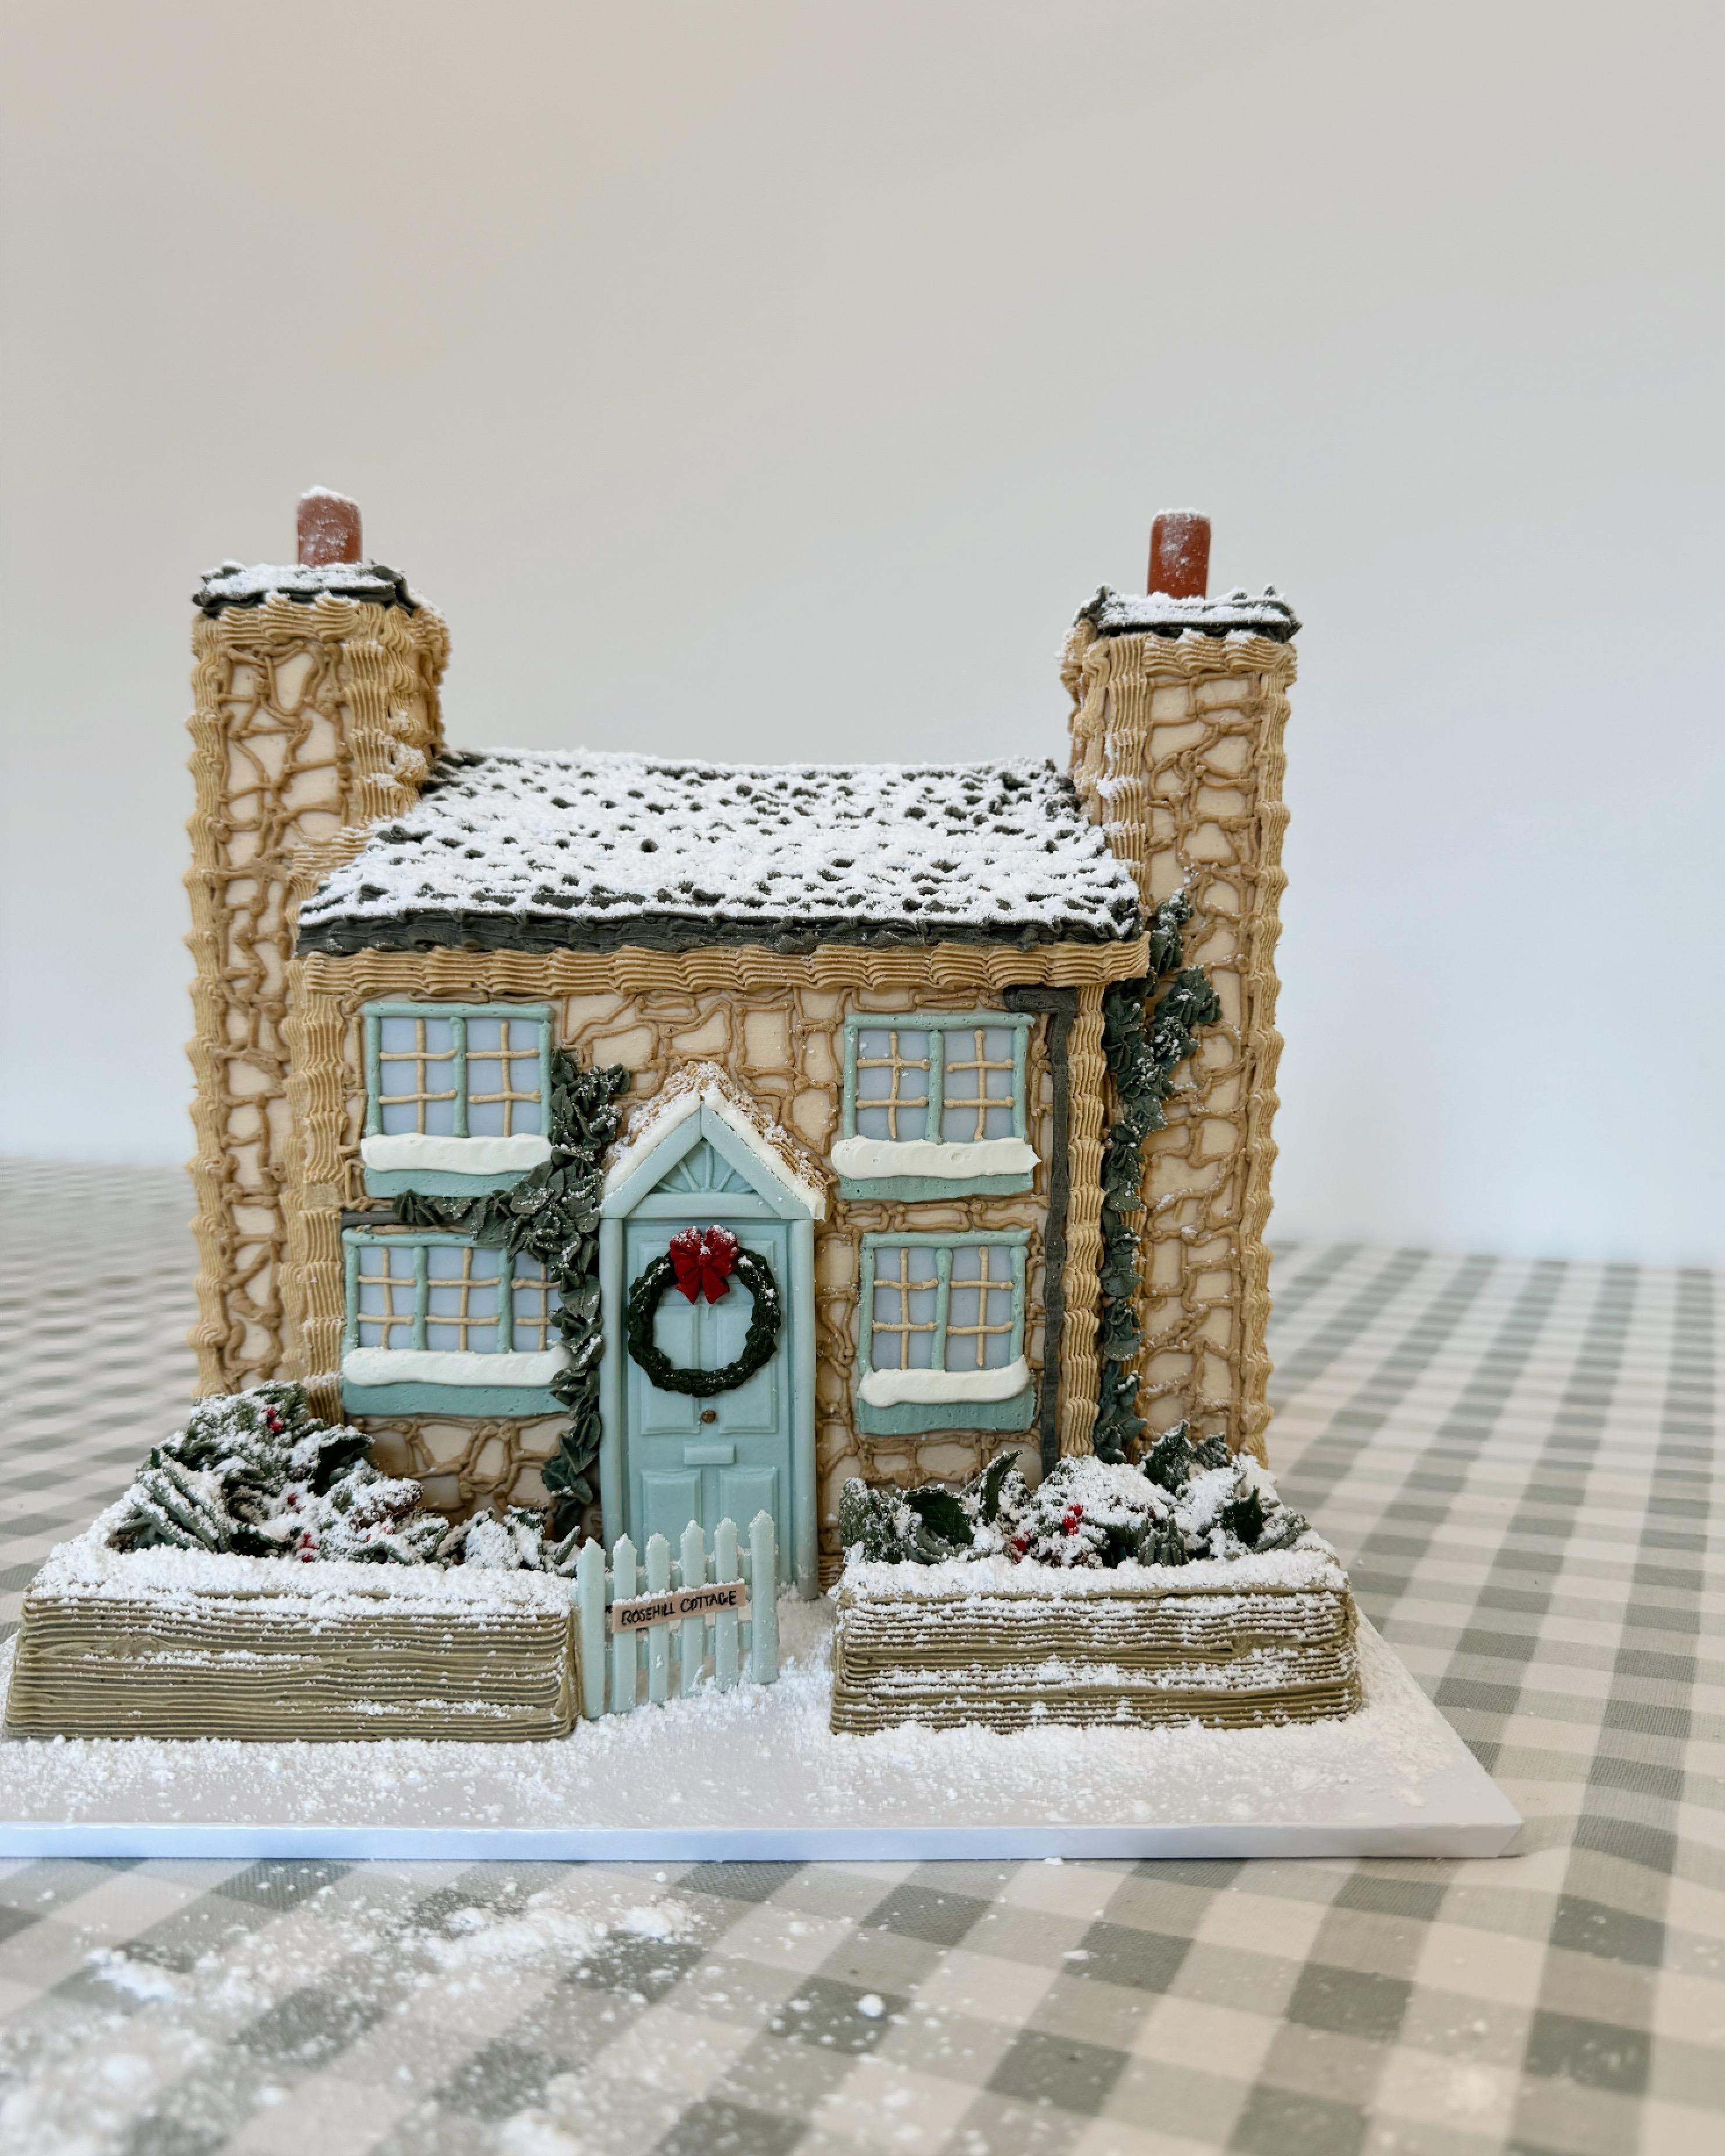 Bridie West's cake which has been designed to look like Rosehill Cottage from the movie The Holiday